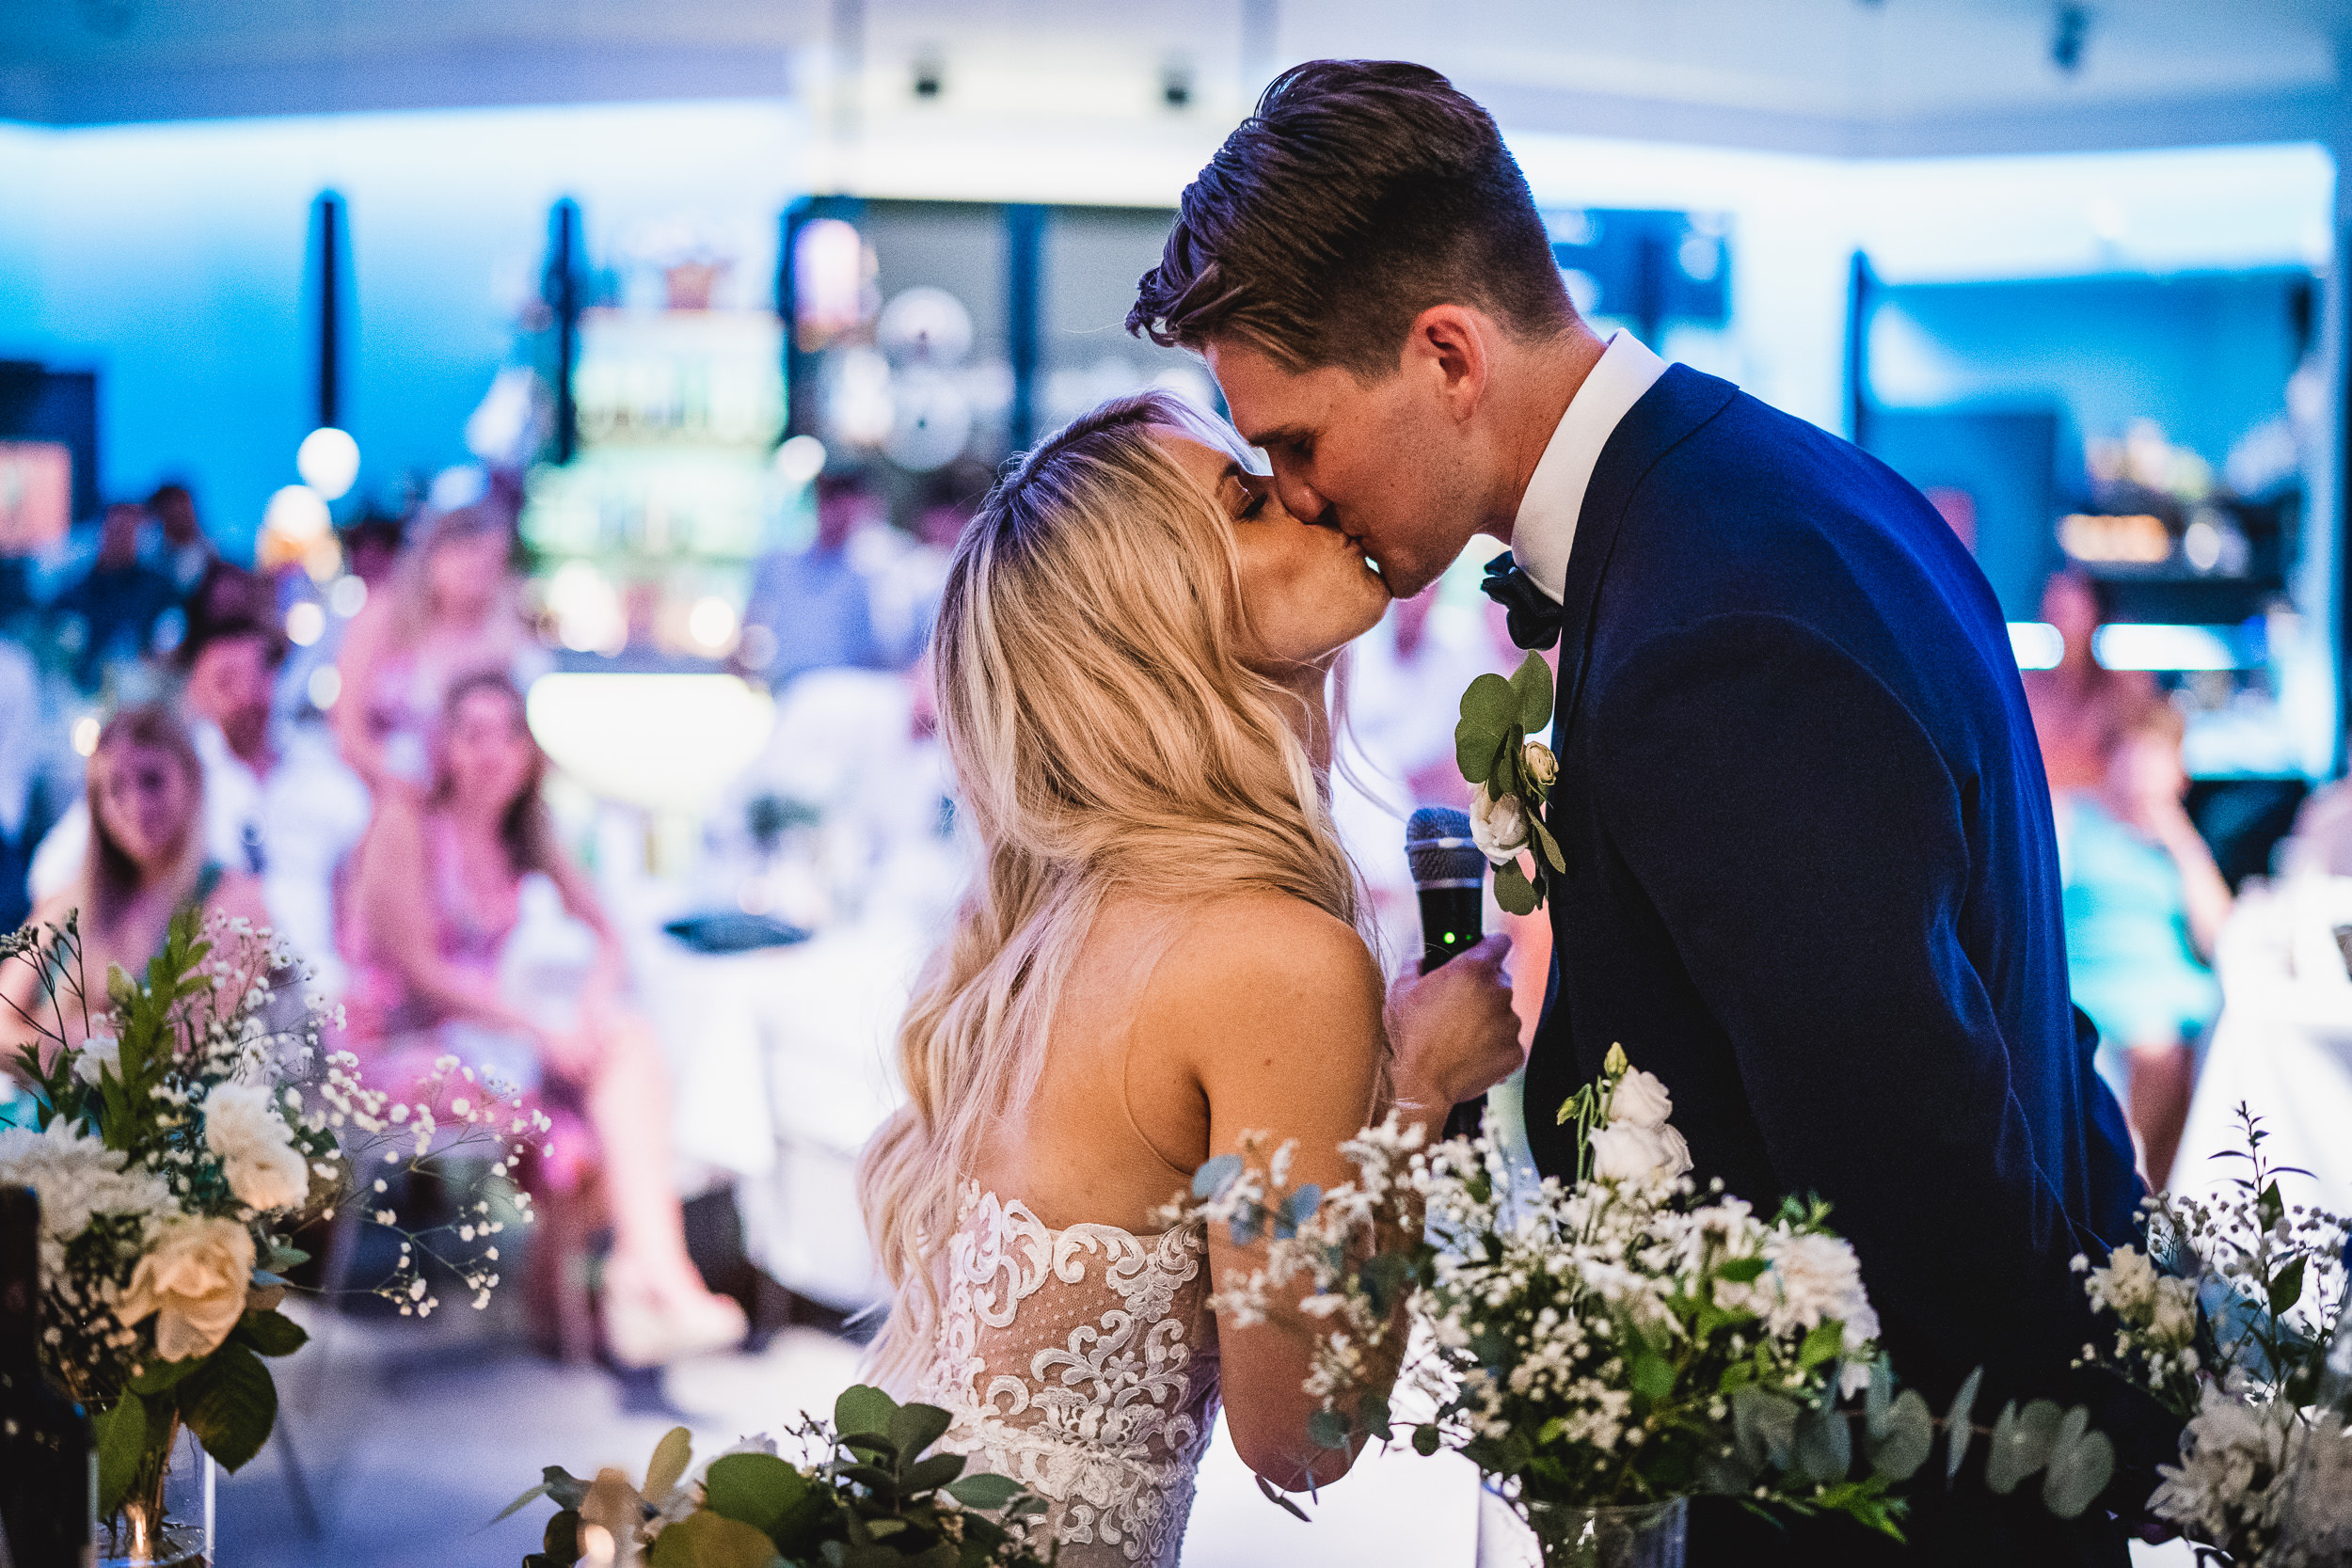 A wedding photographer captures a photo of a bride and groom kissing during their reception.